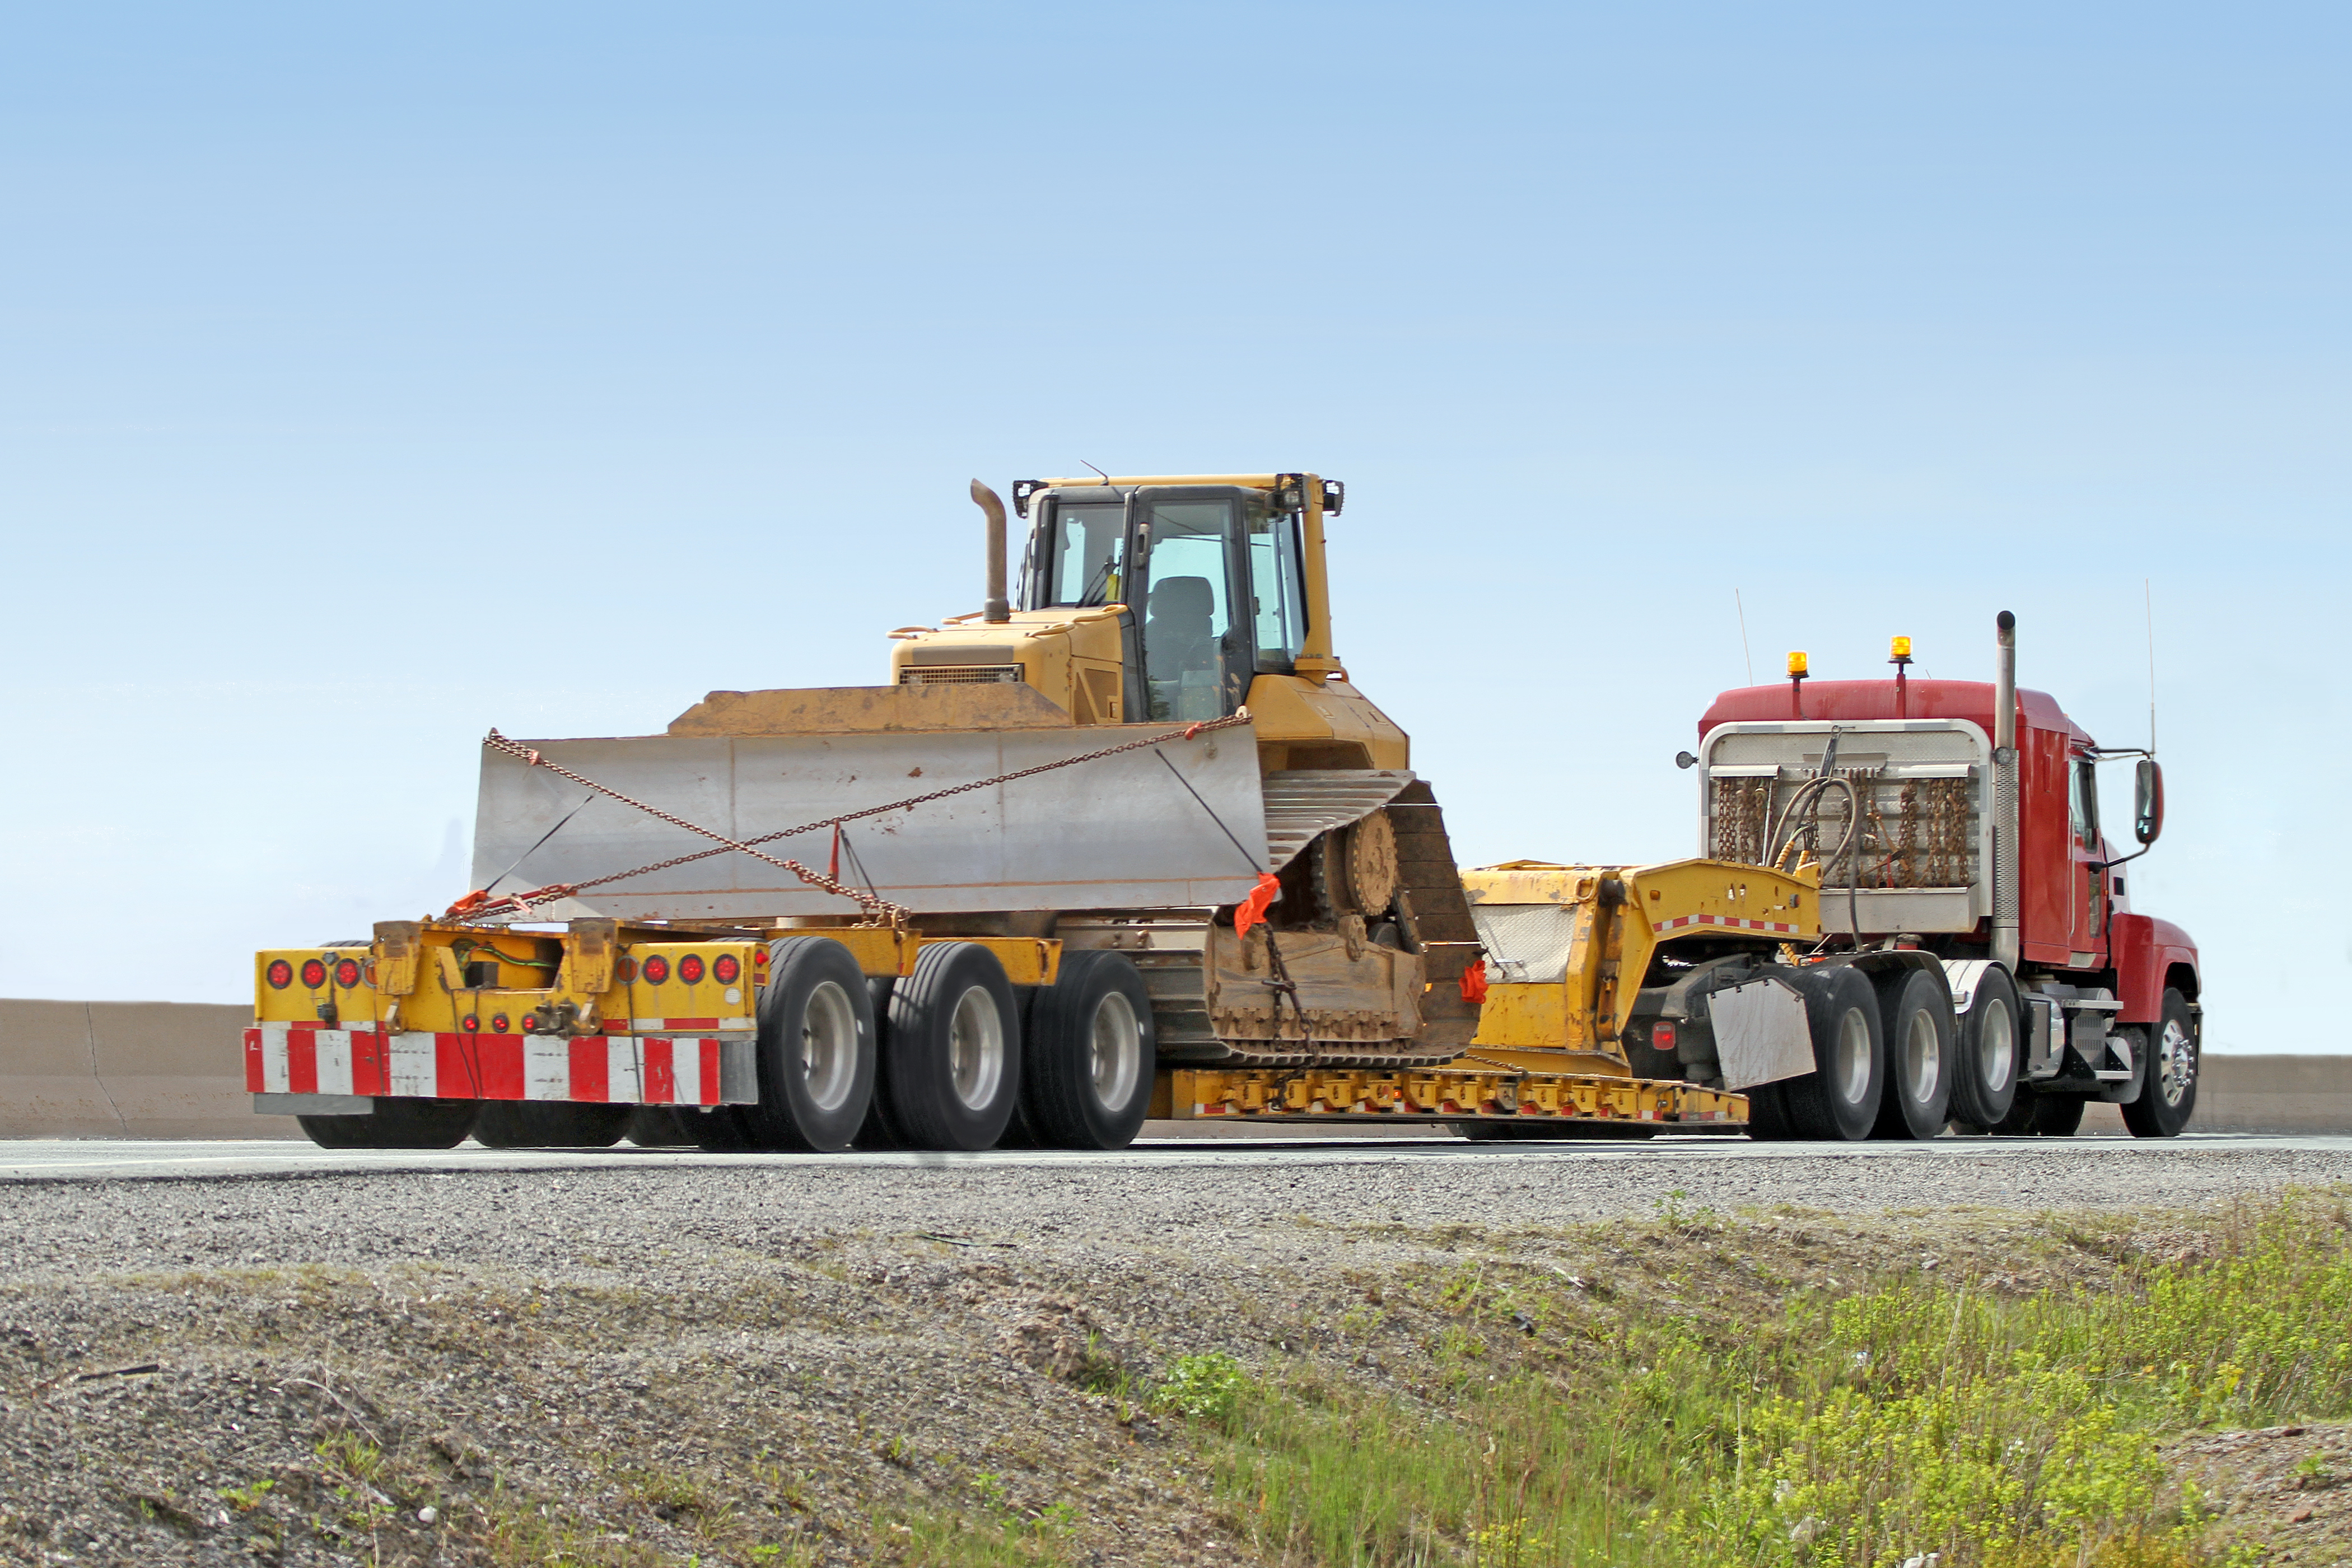 Rear quarter view of a flatbed semi truck on a highway transporting a large bulldozer.